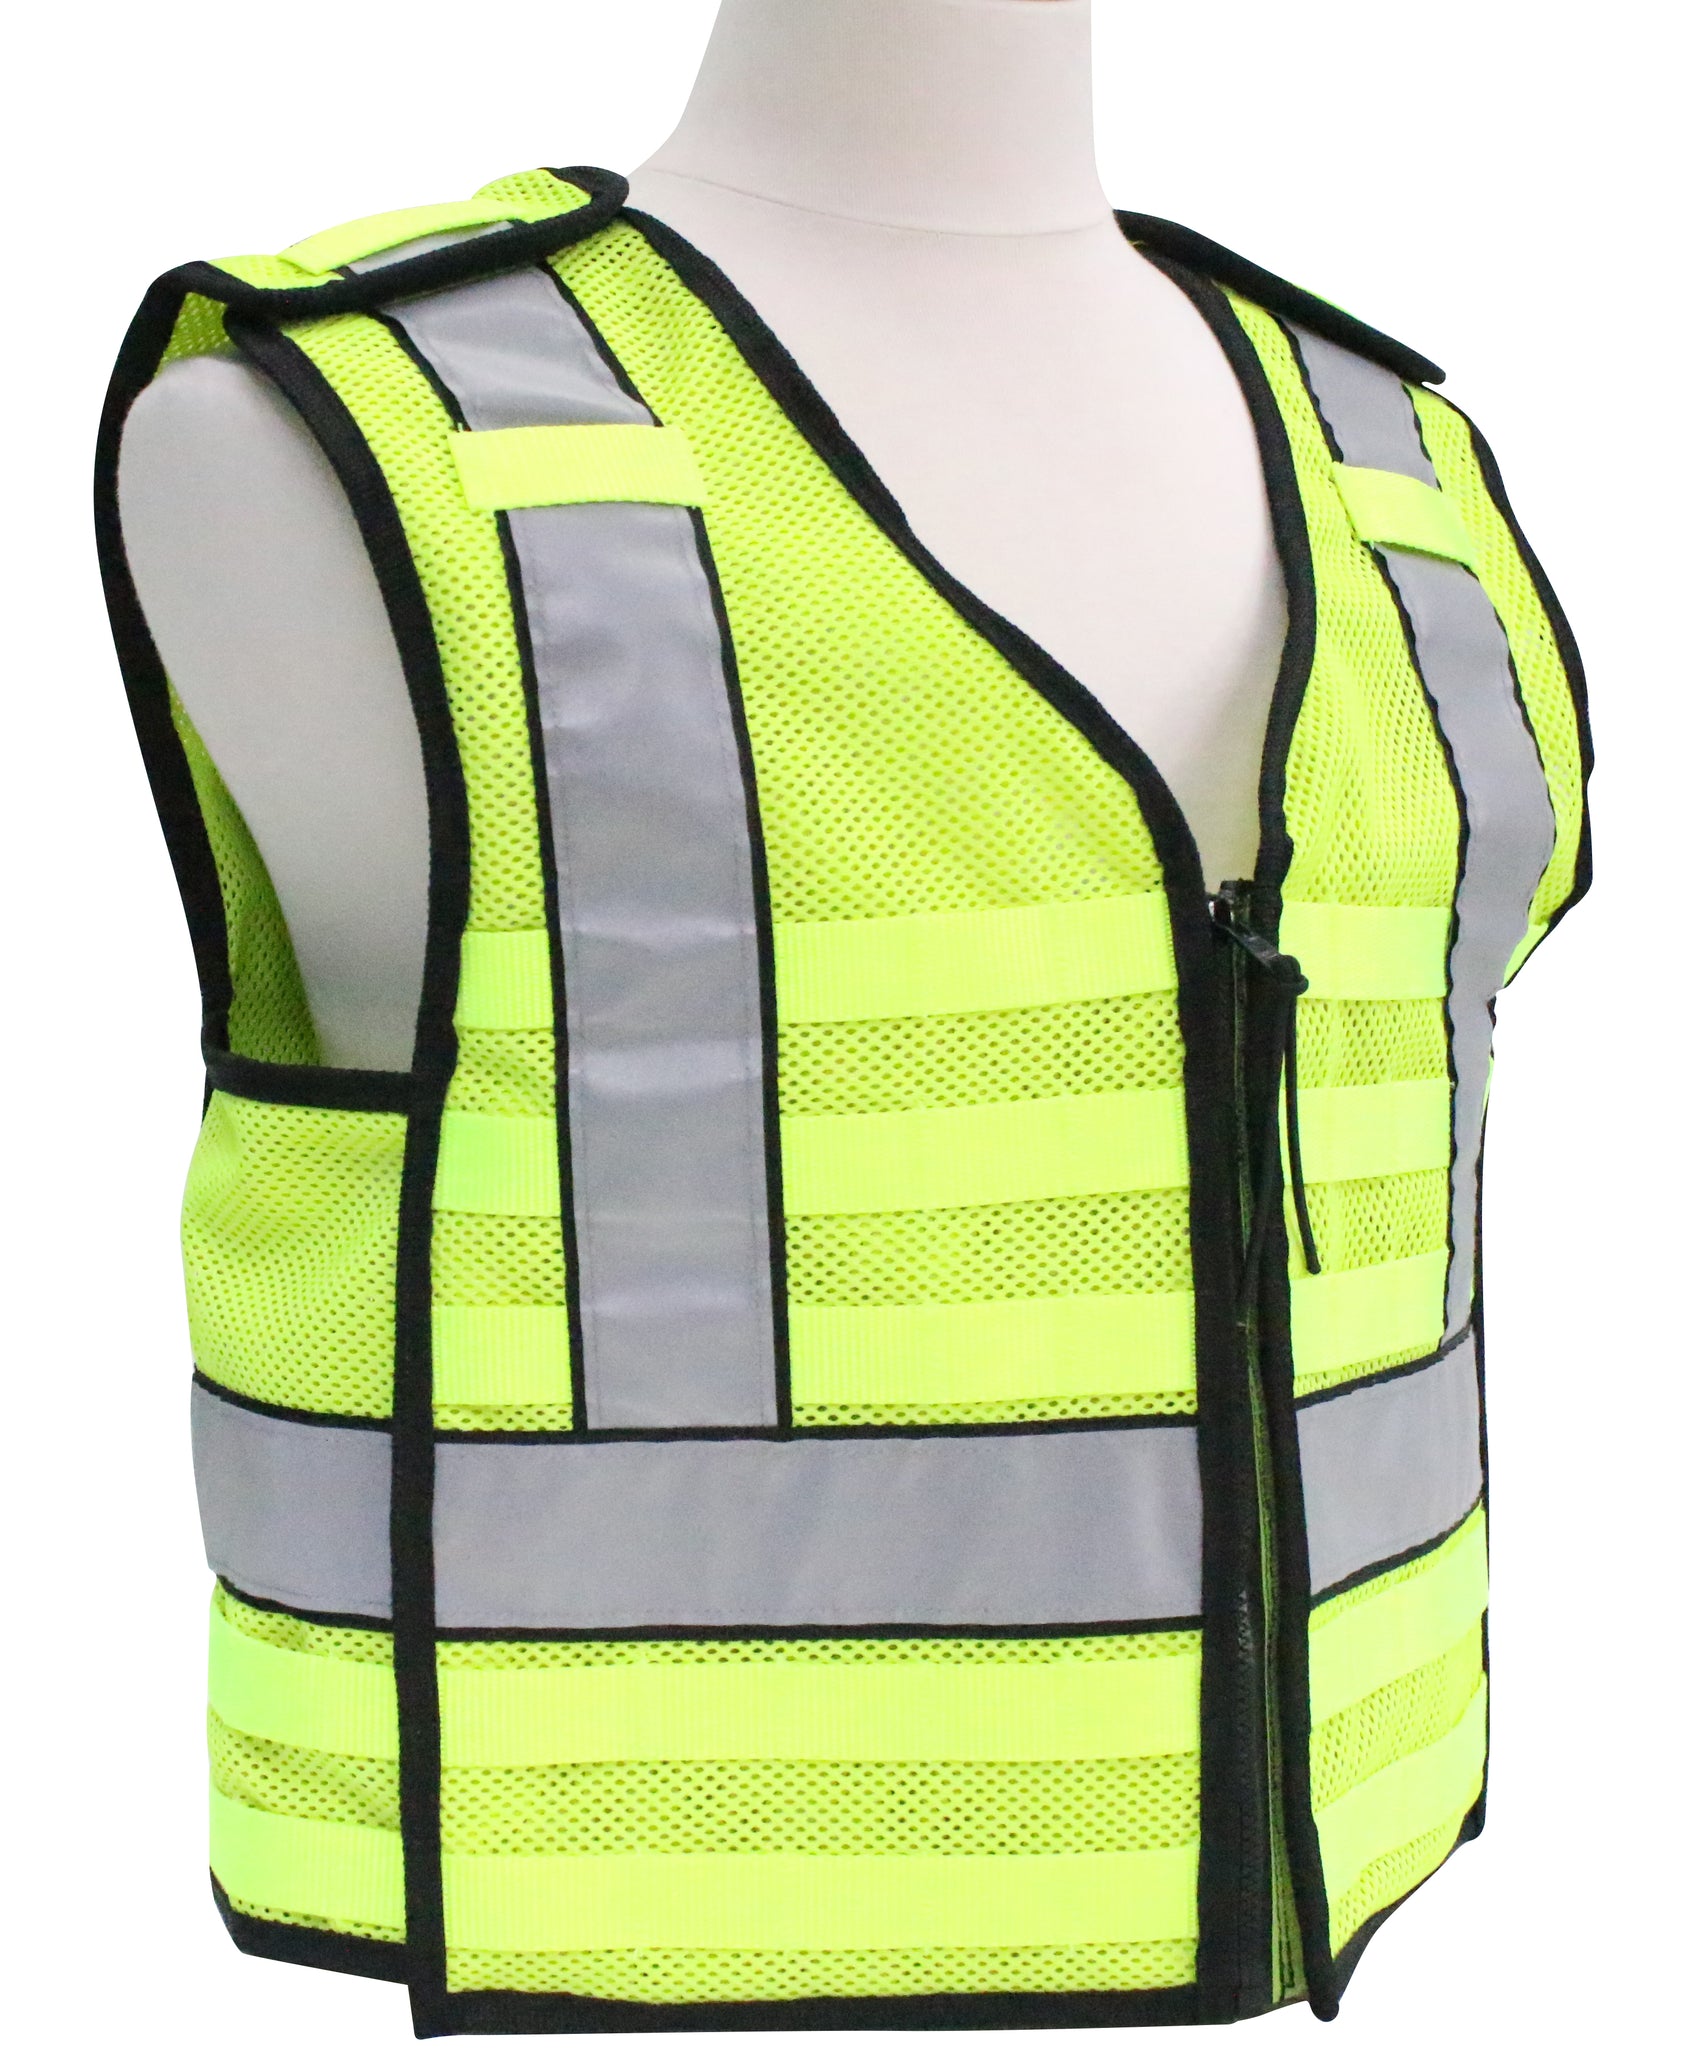 High Visibility Clothing & Safety Products